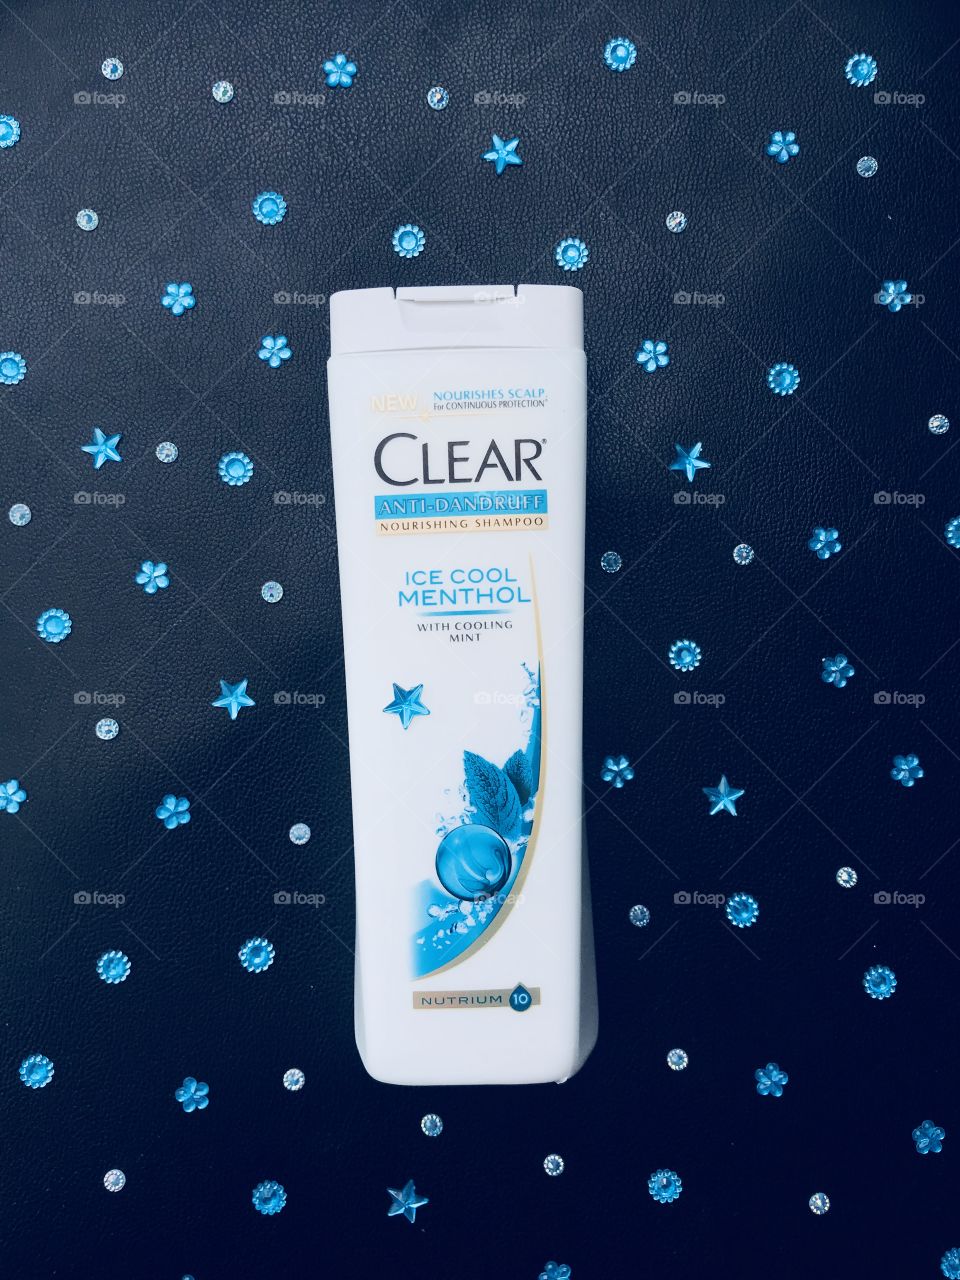 Show your Clear Shampoo